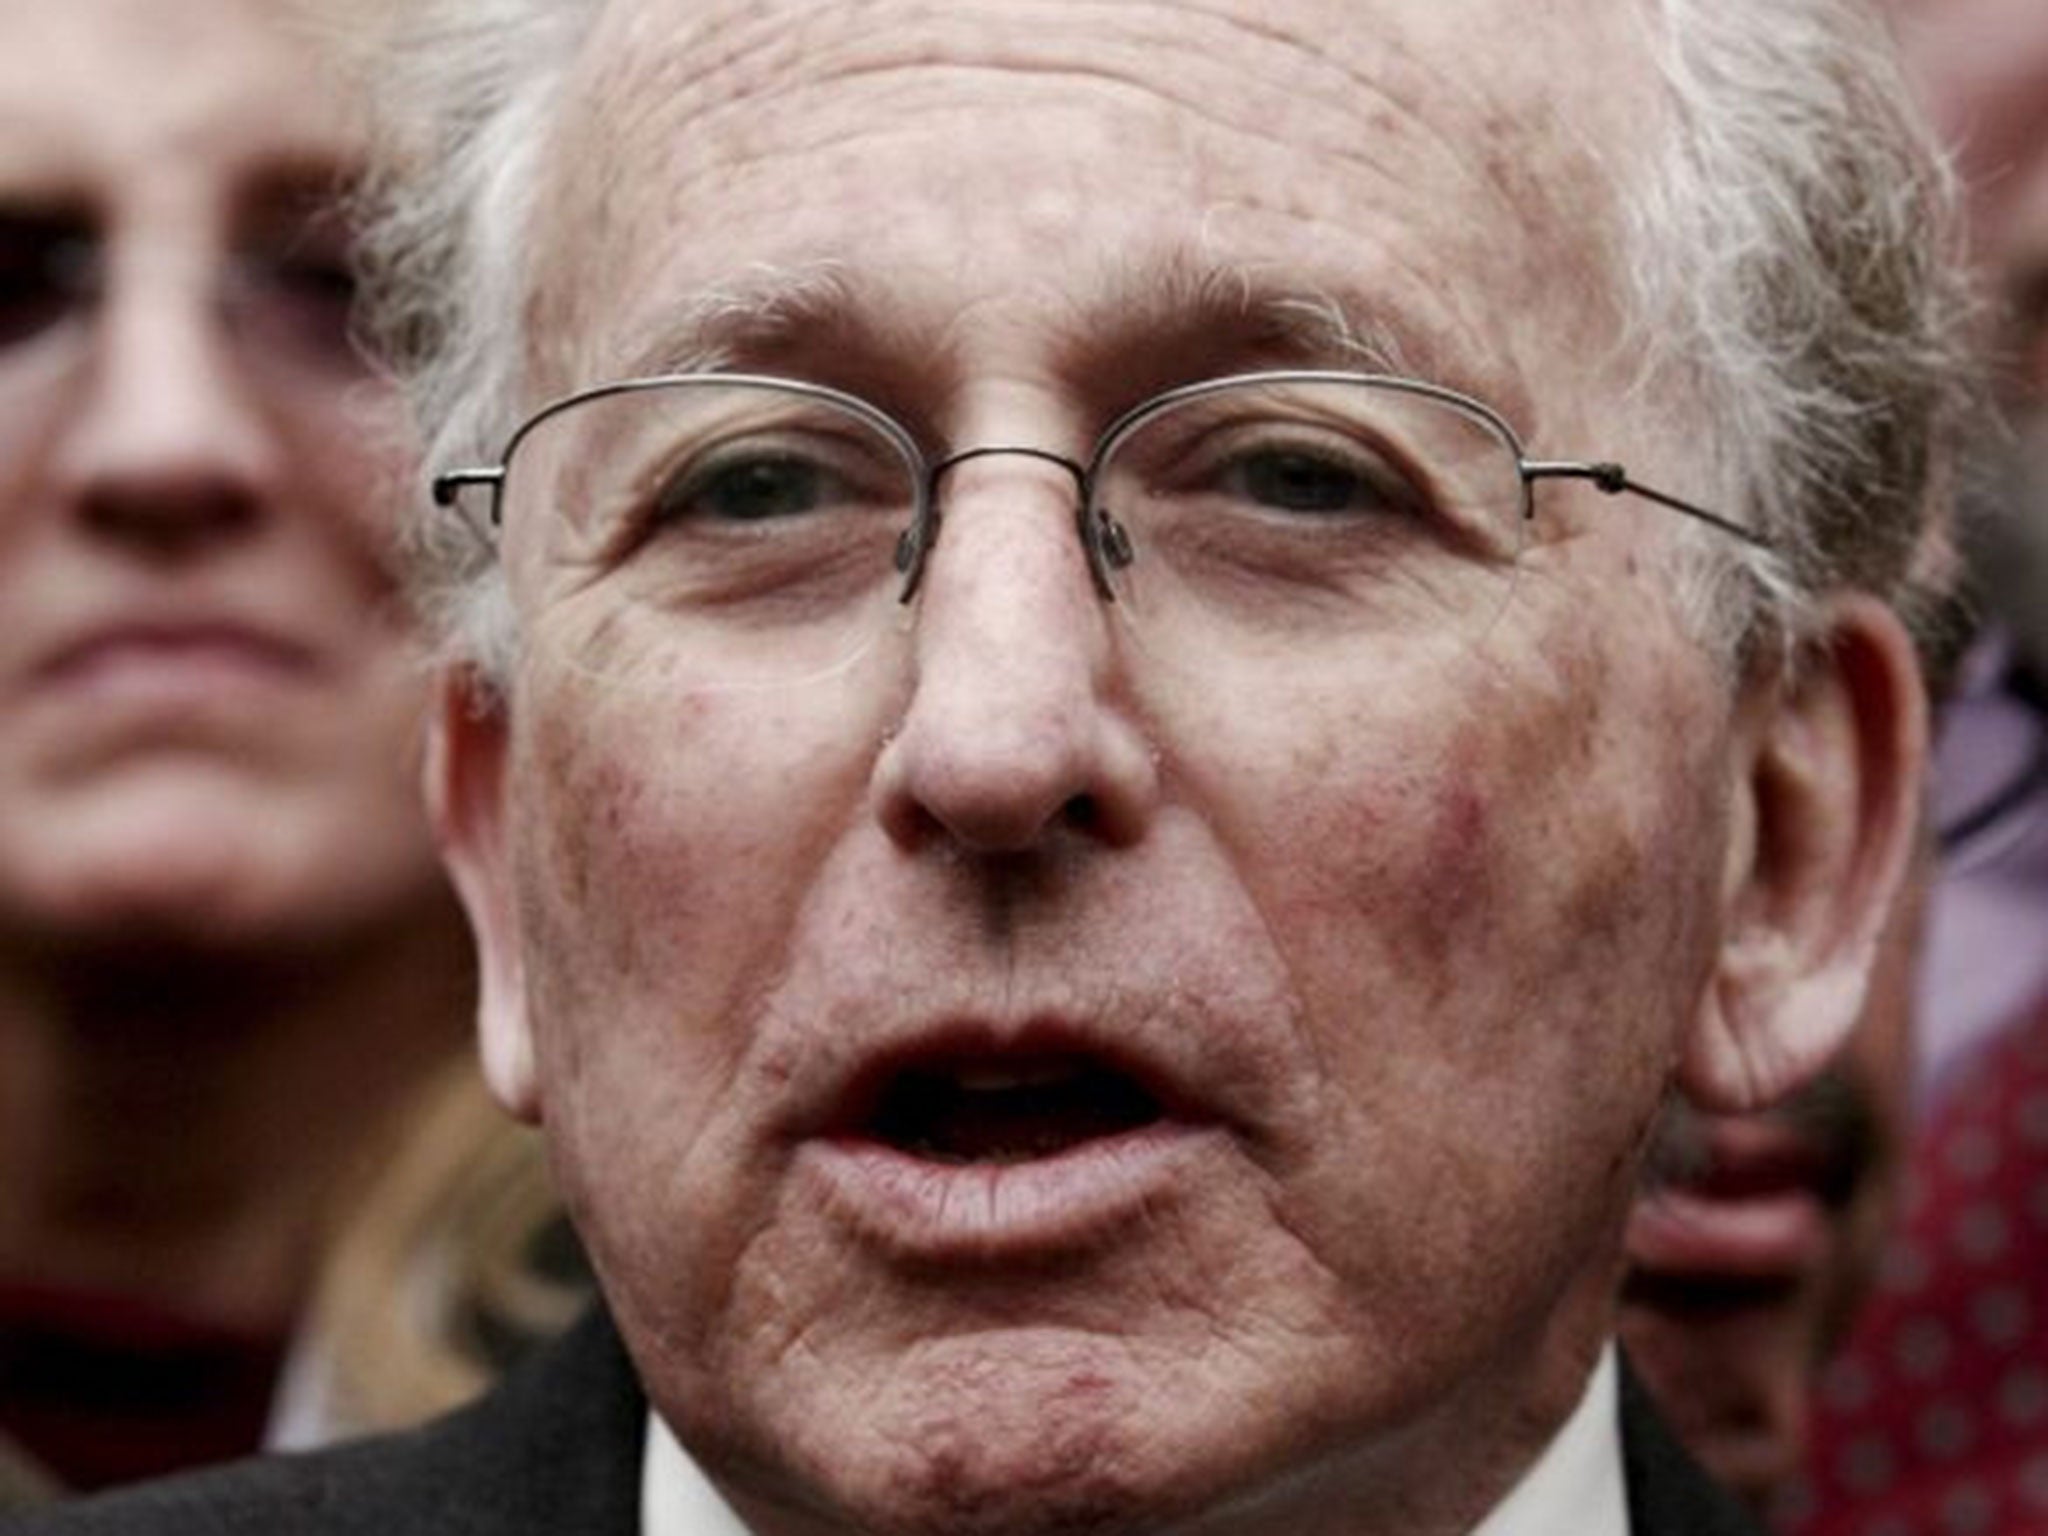 Lord Greville Janner is accused of historical sex crimes on young boys